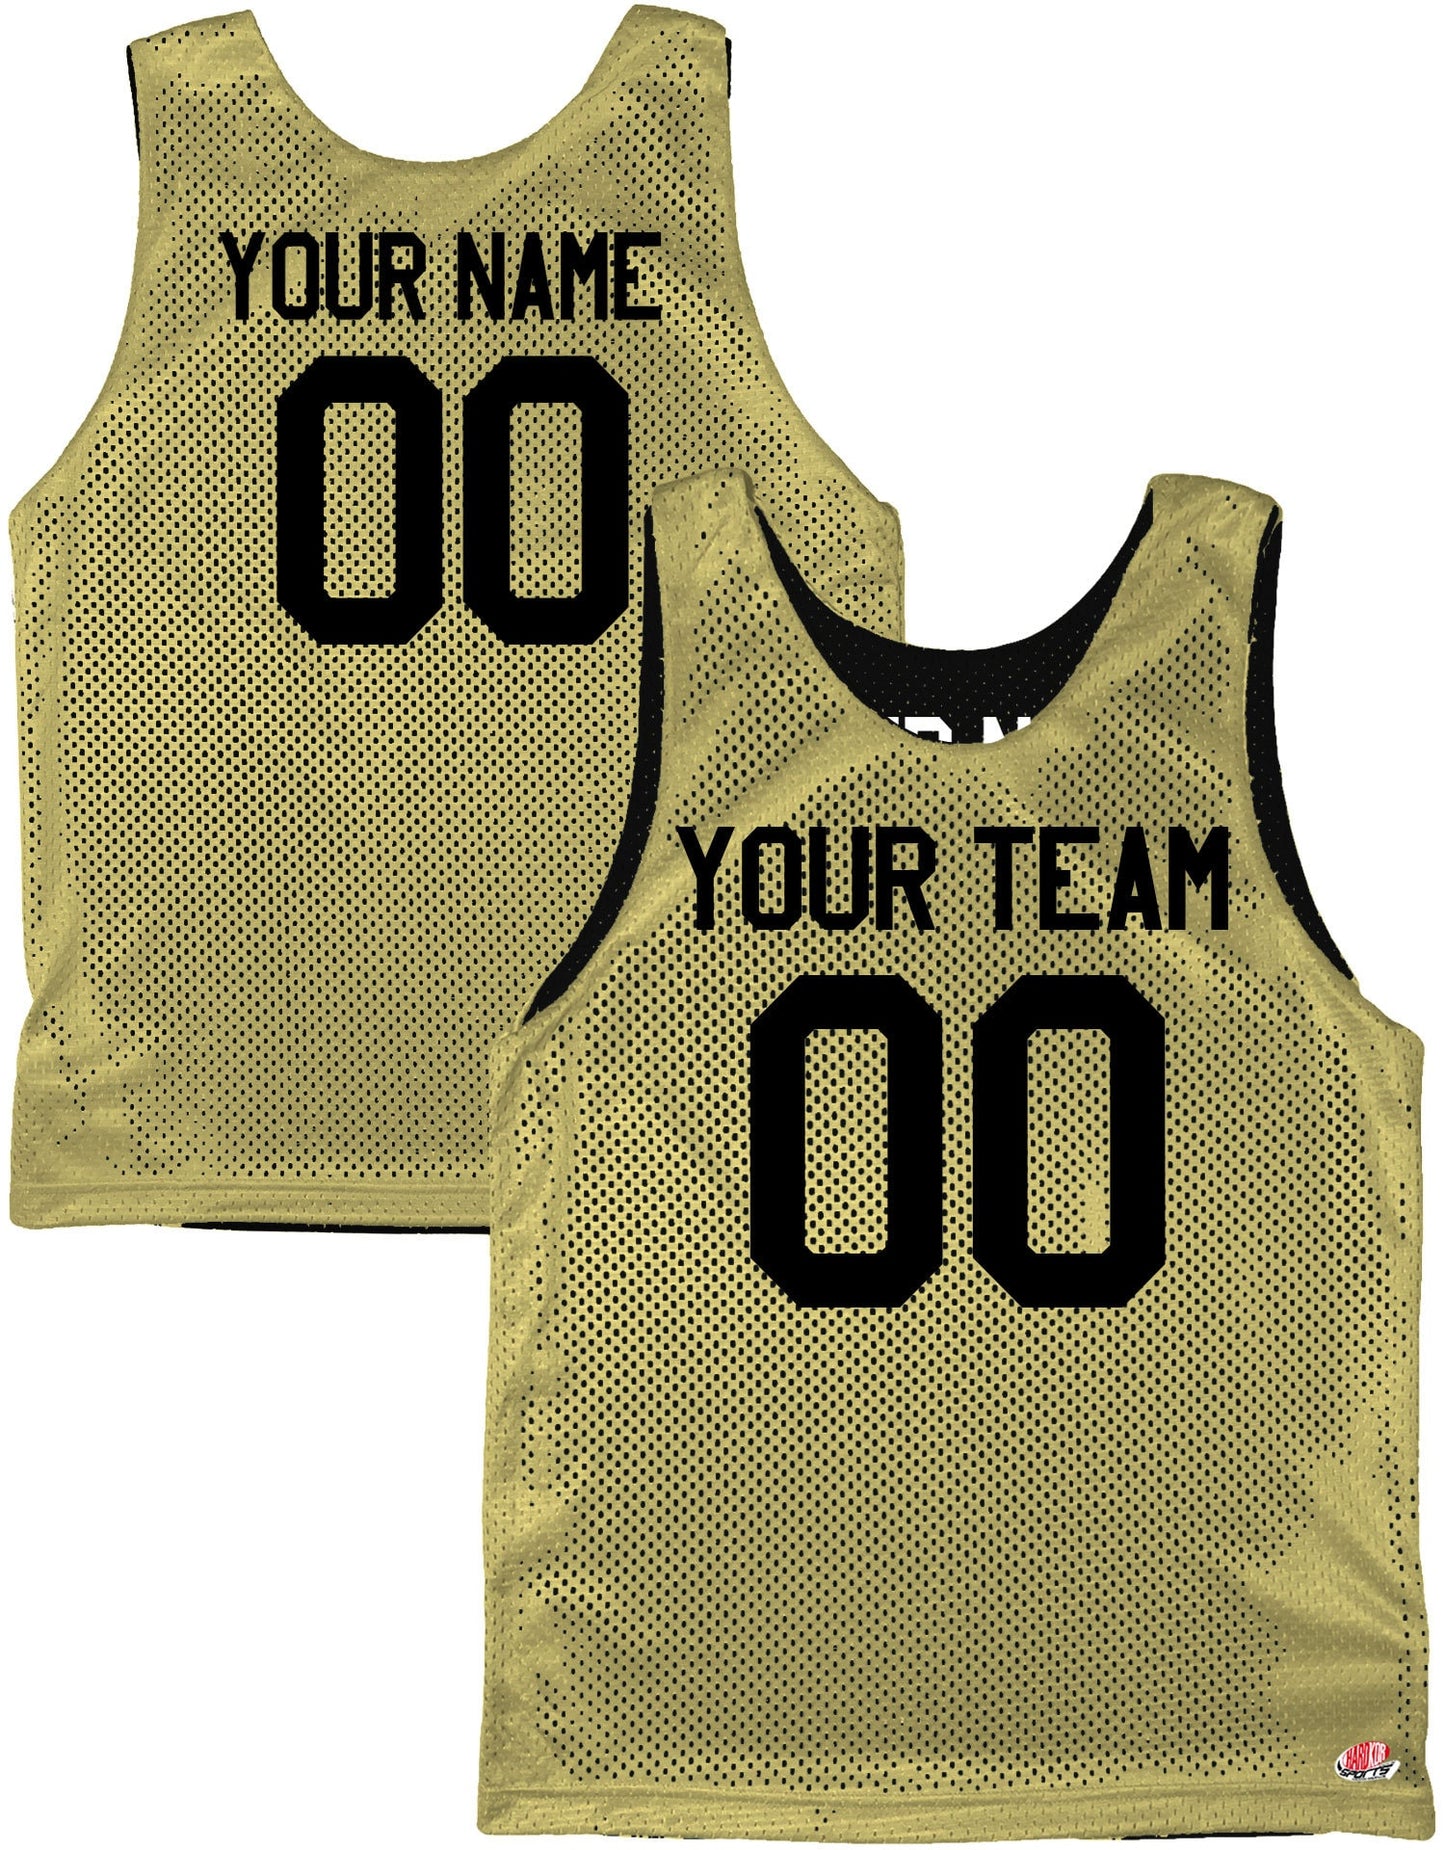 Dark Forest Green, Vegas Gold, Gold, Black and White | Custom Reversible Basketball Jersey | Tricot Mesh.  Team, Player Name, Numbers